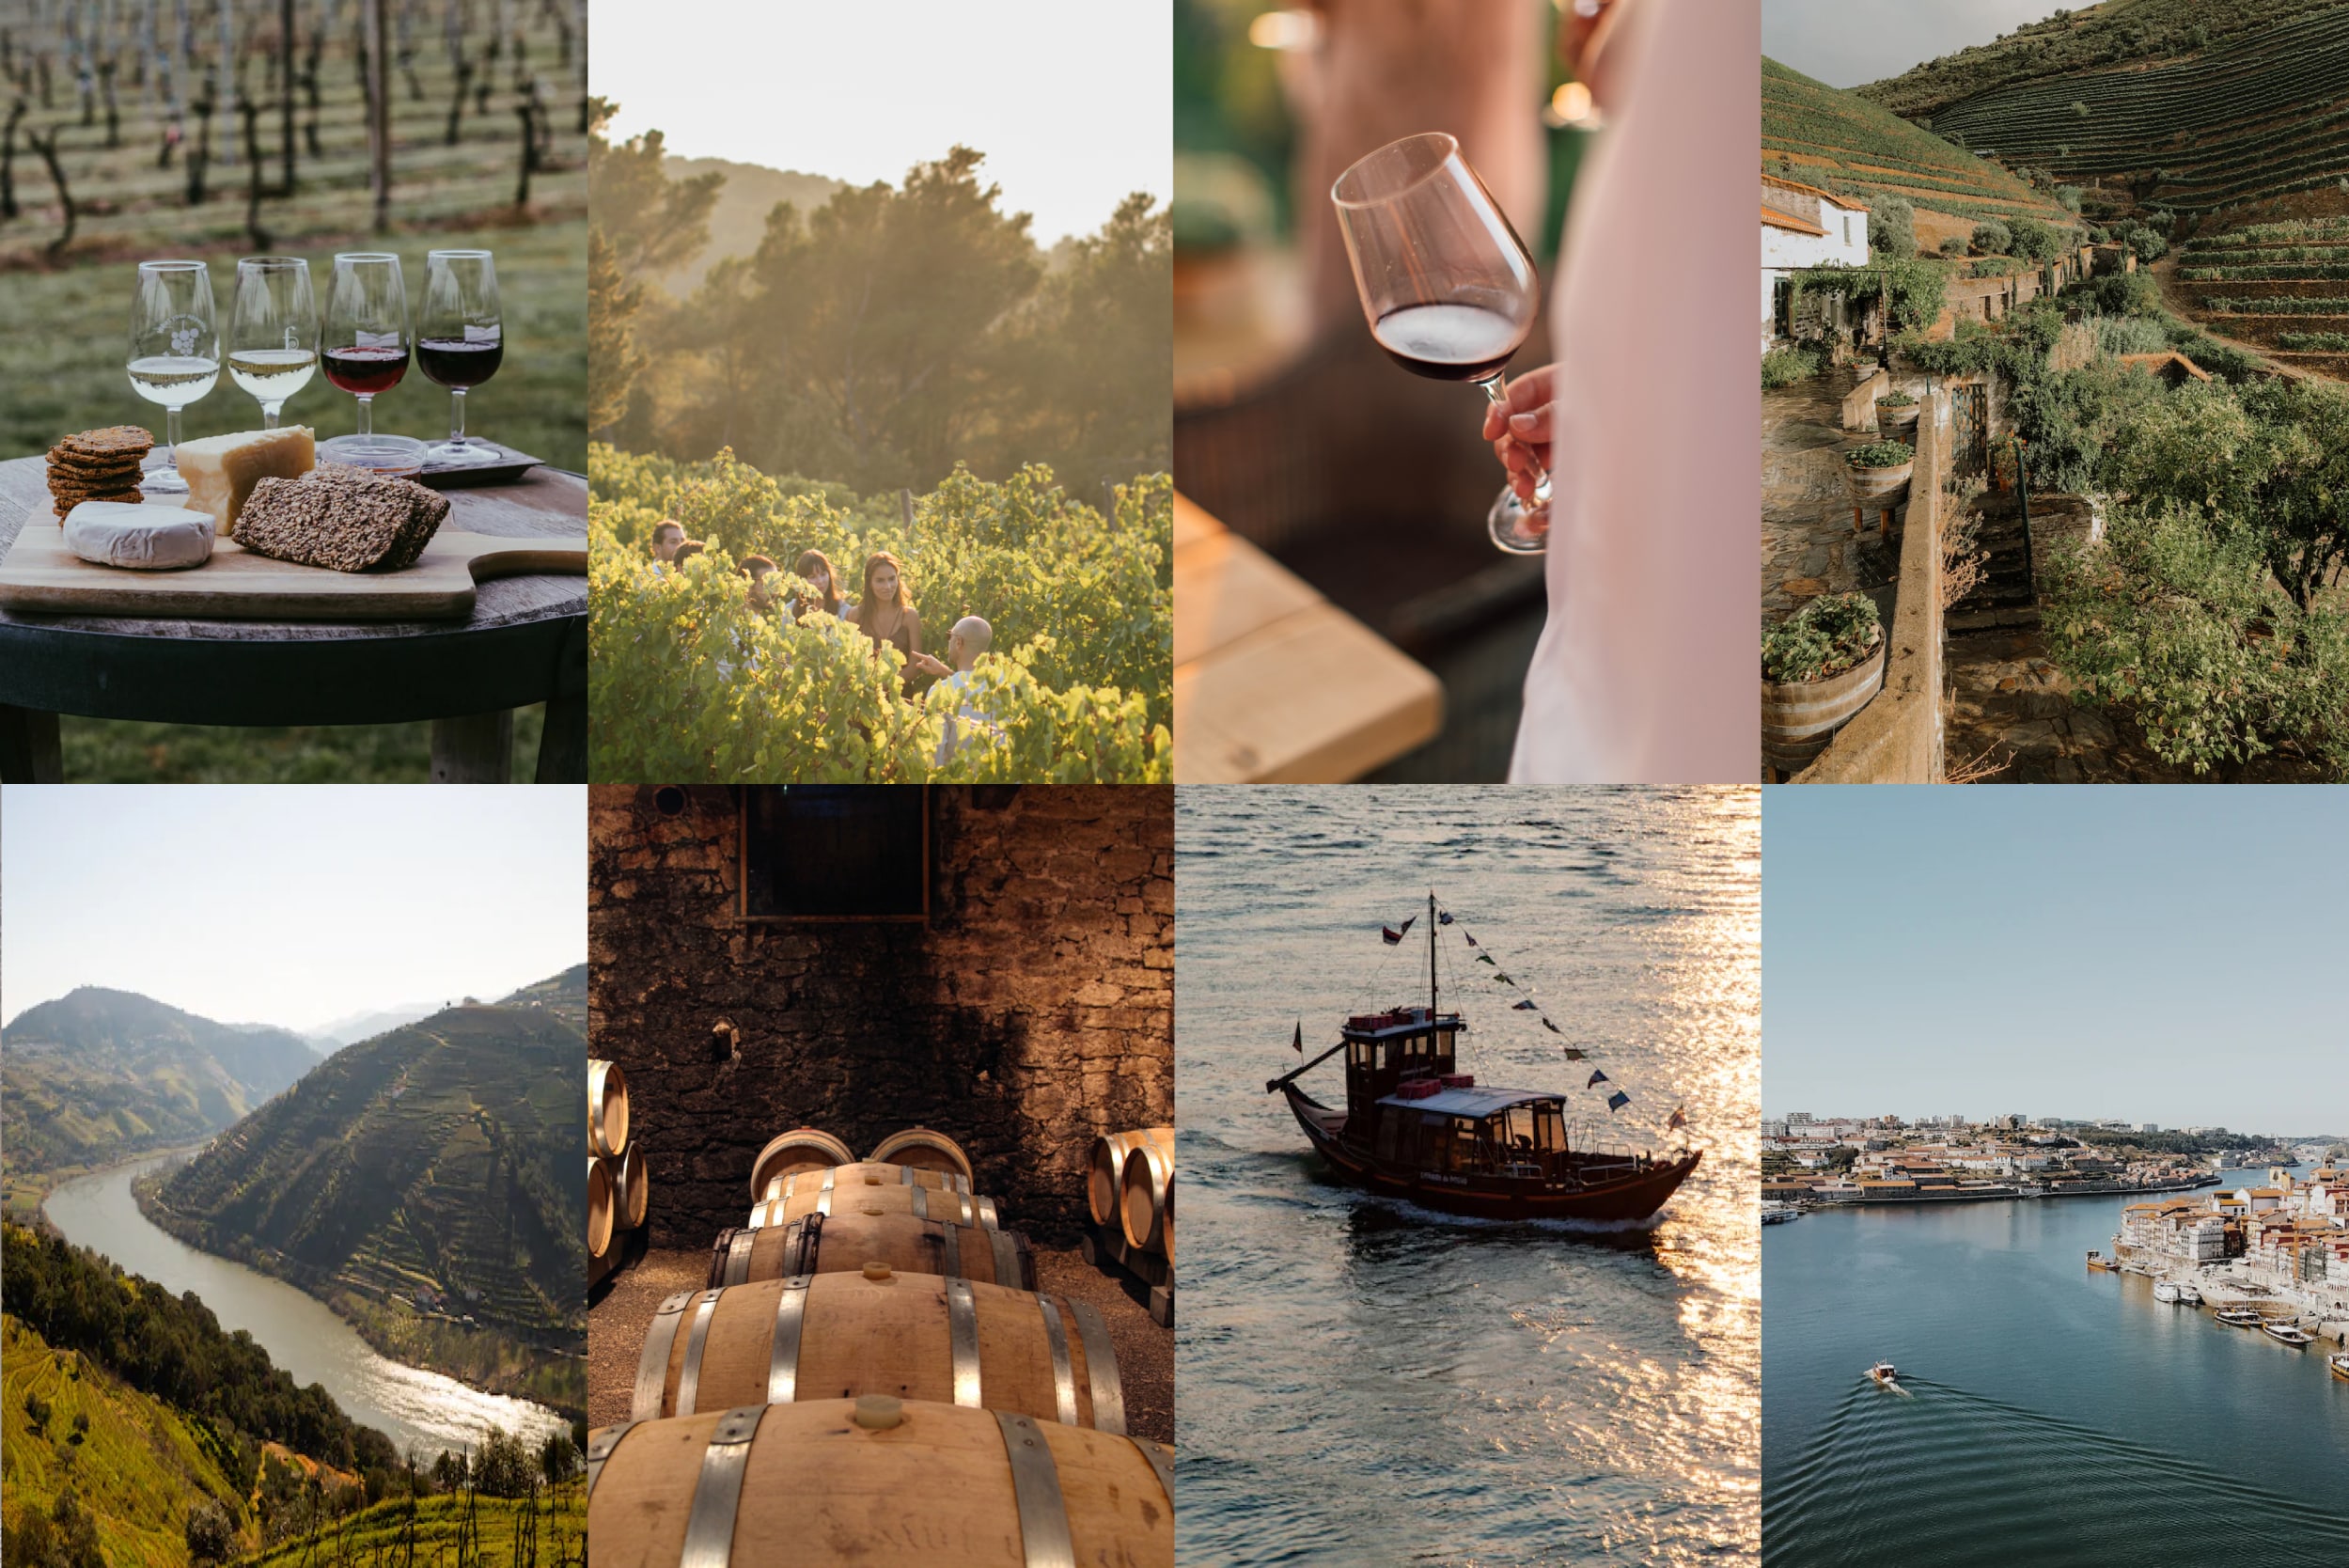 Discover the Douro Valley with Le Collectionist, an exclusive guide